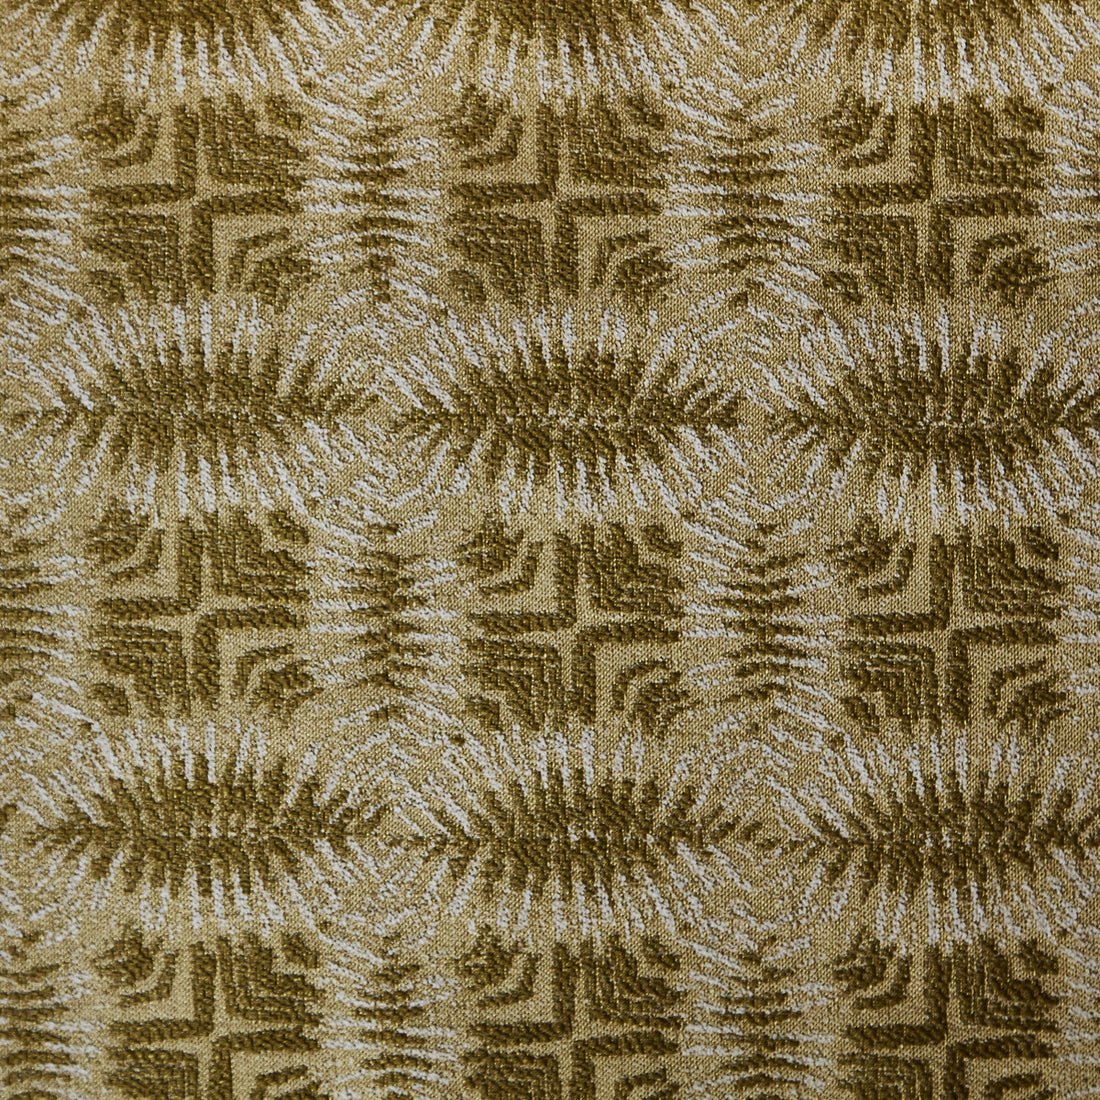 Calypso fabric in meadow color - pattern GWF-3204.23.0 - by Lee Jofa Modern in the Allegra Hicks Islands collection